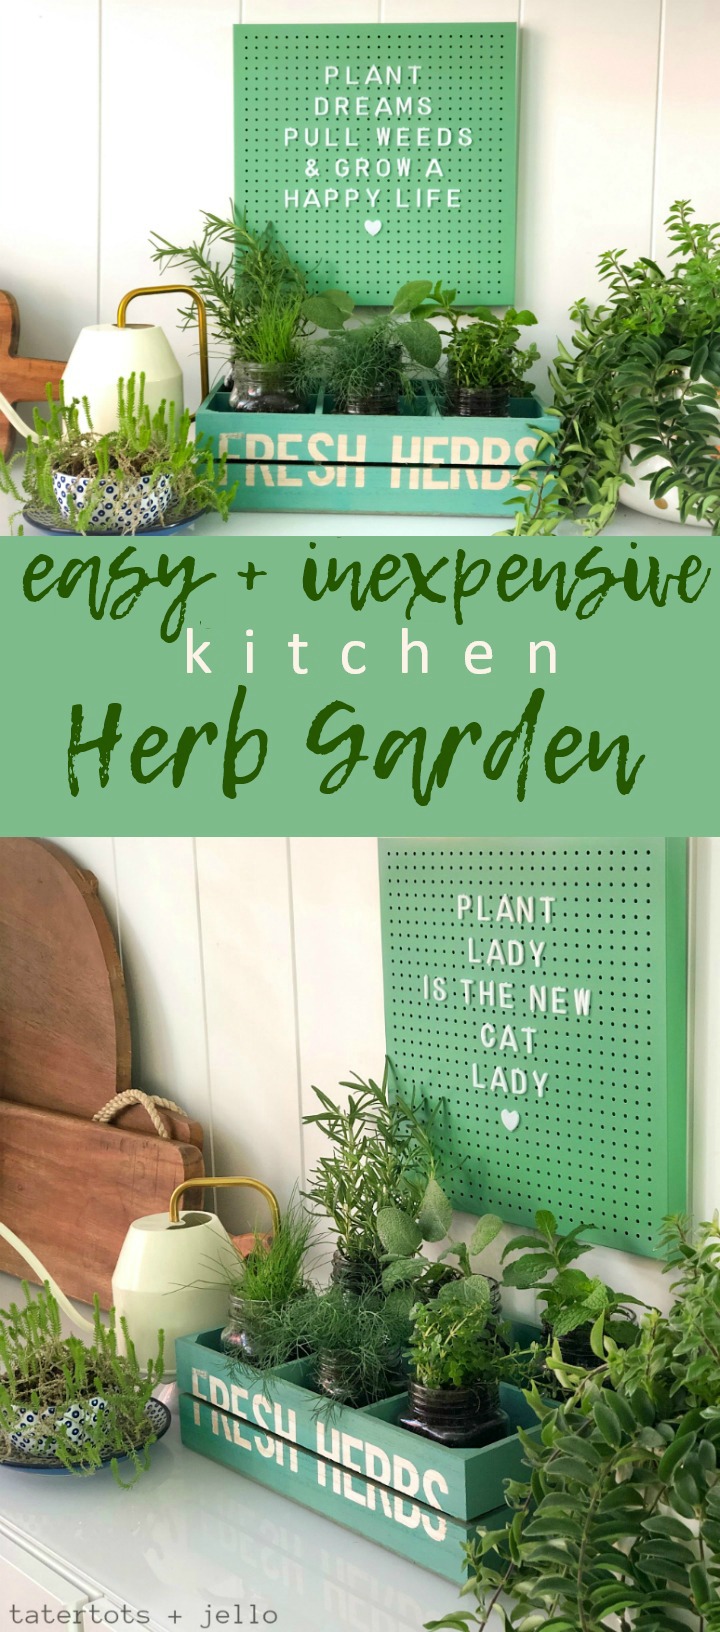 Create an easy and inexpensive kitchen herb garden with dollar spot items!